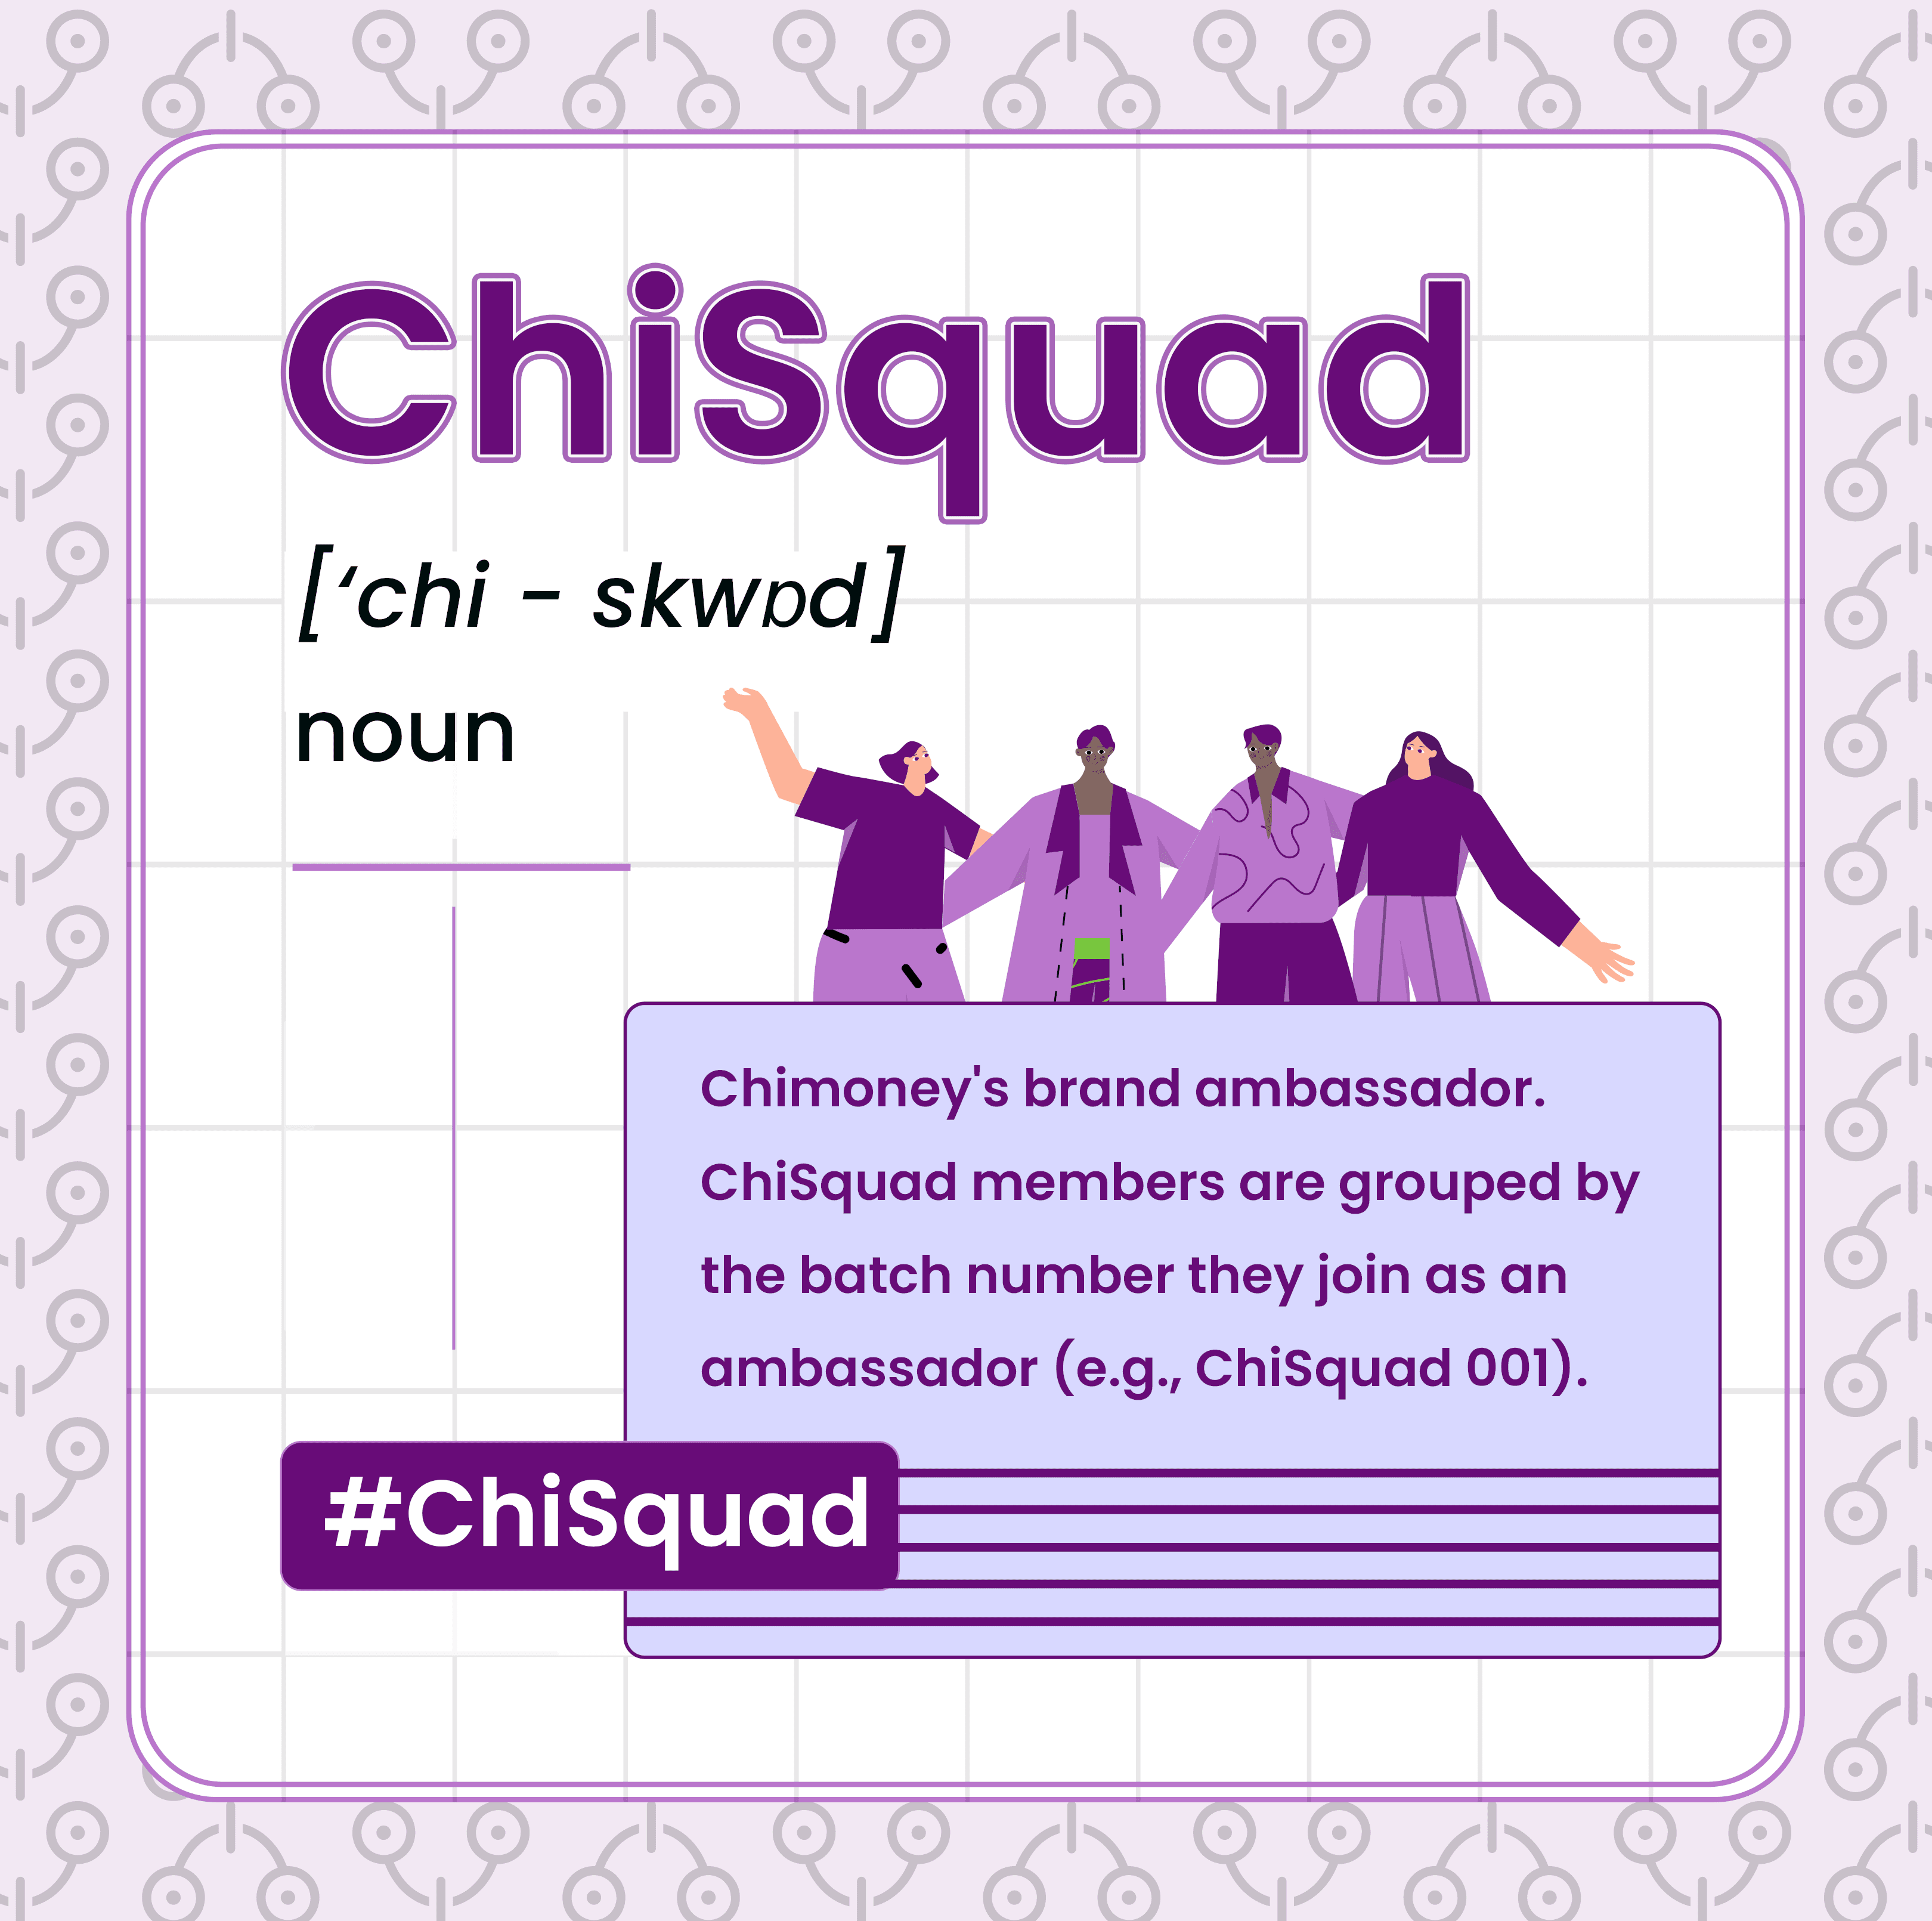 What is ChiSquad